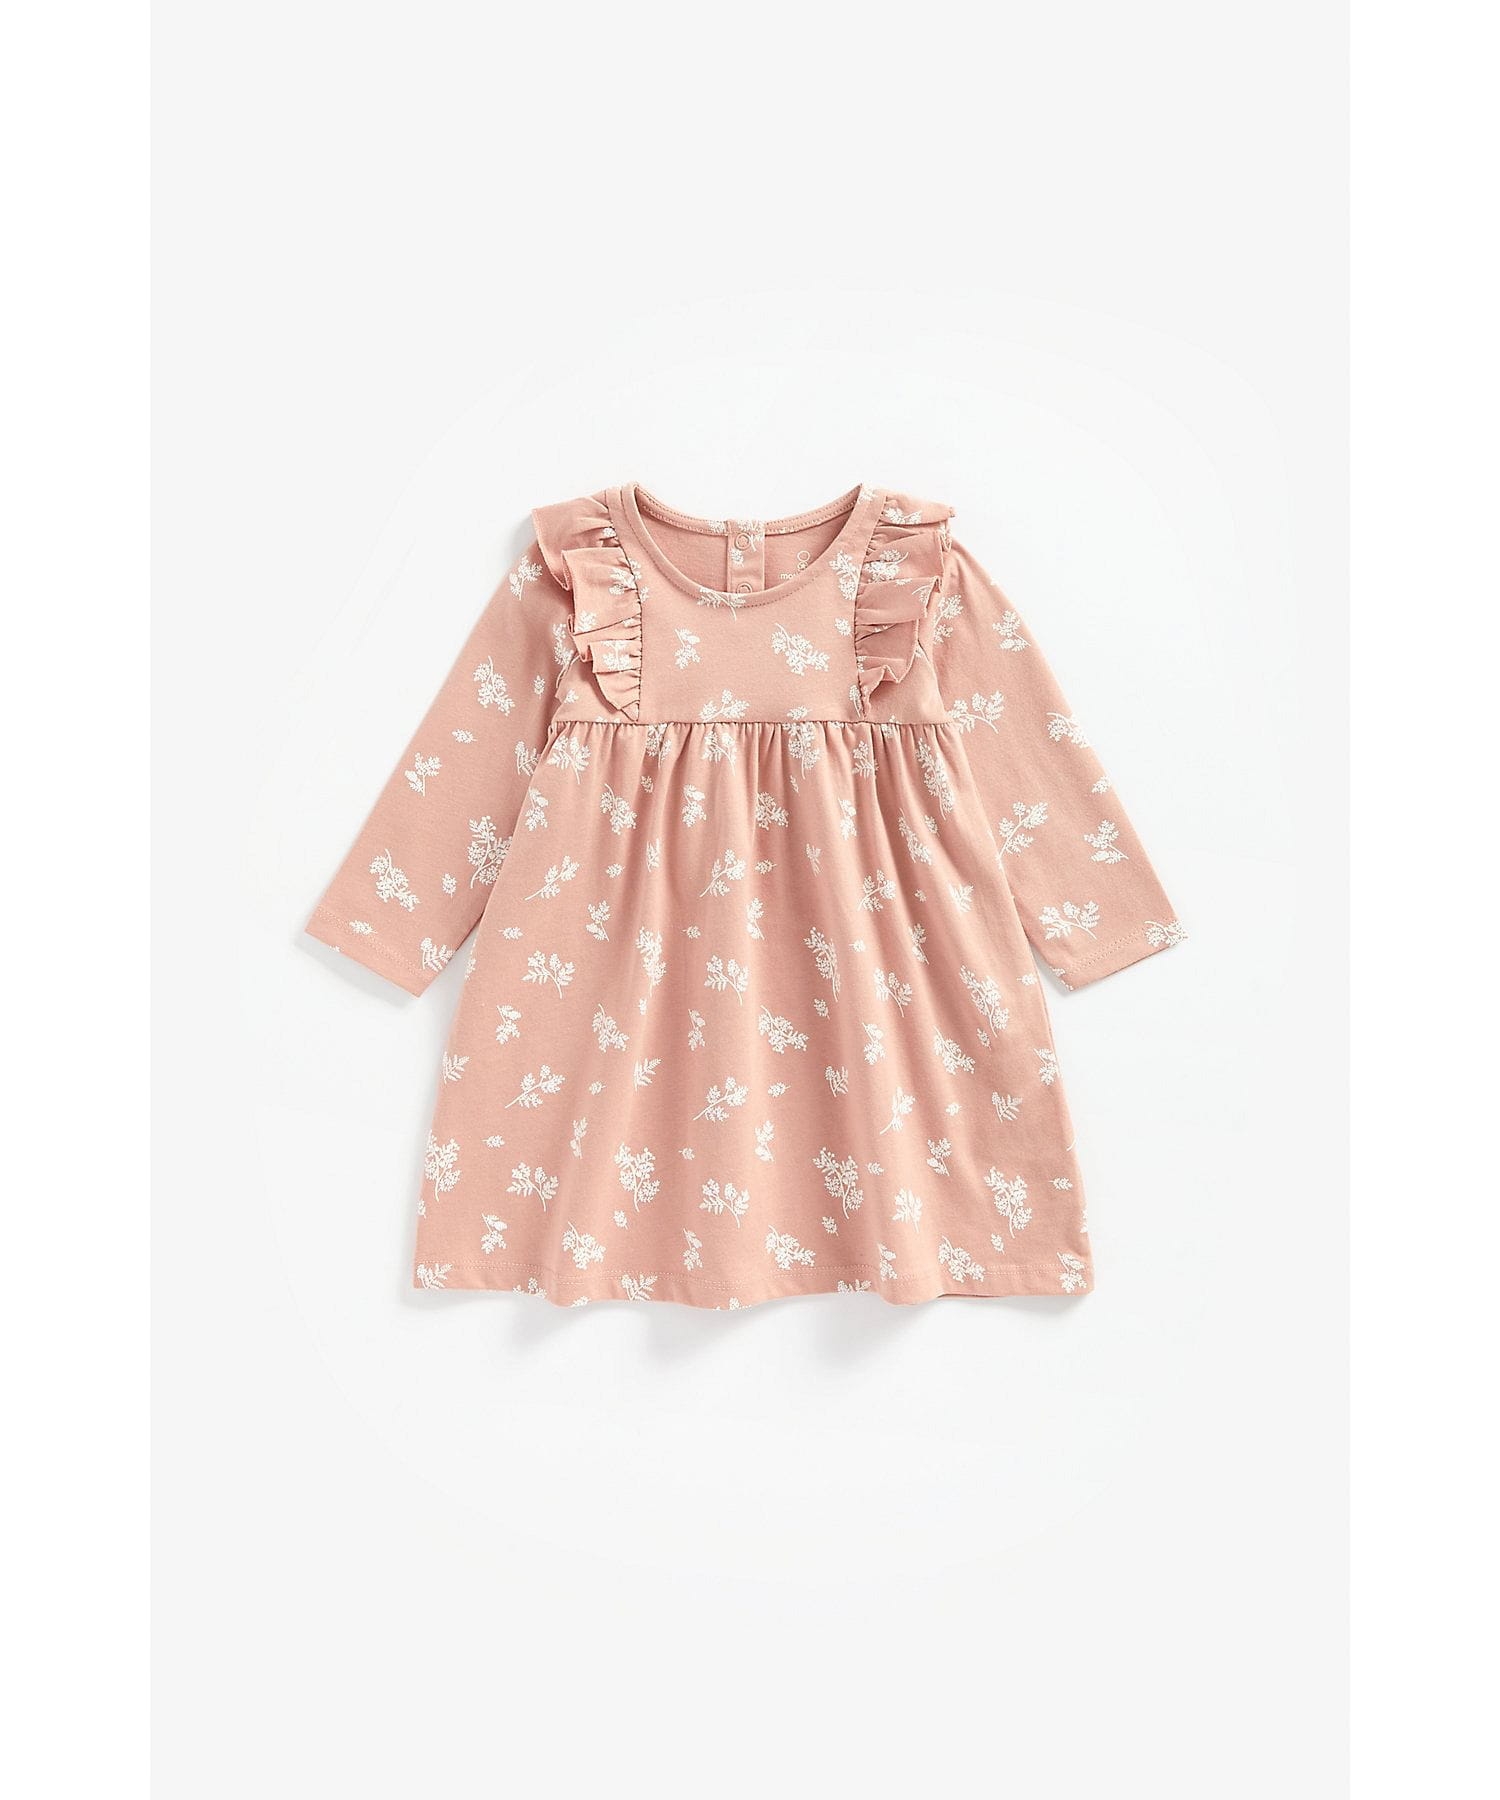 Mothercare | Girls Full Sleeves Floral Print Dress Frill Details - Pink 0